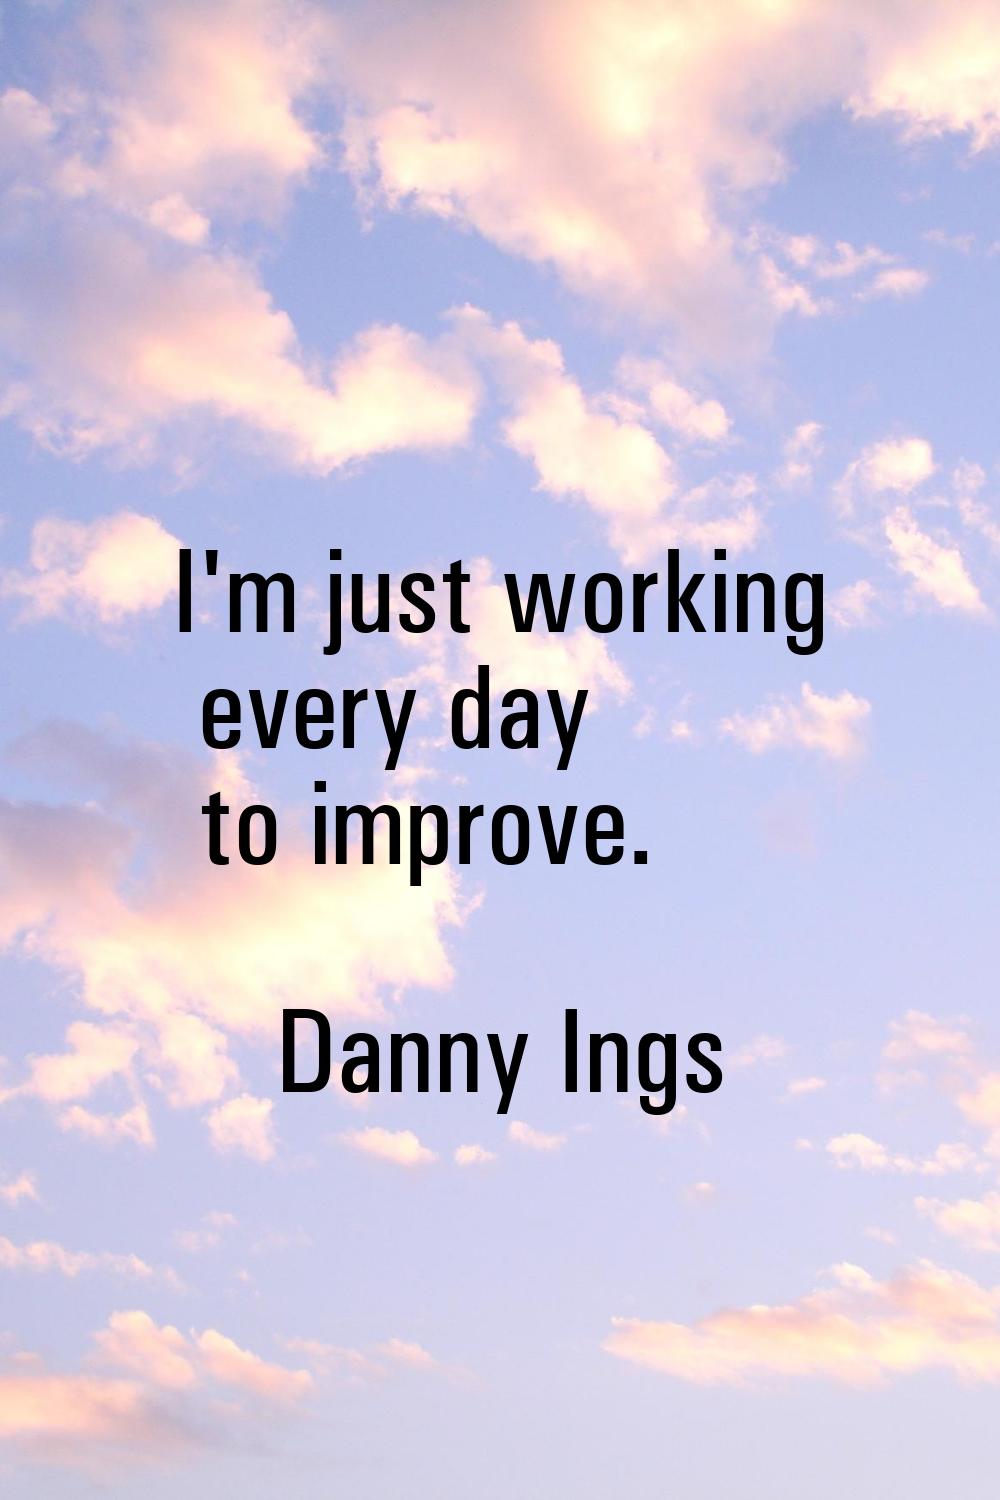 I'm just working every day to improve.